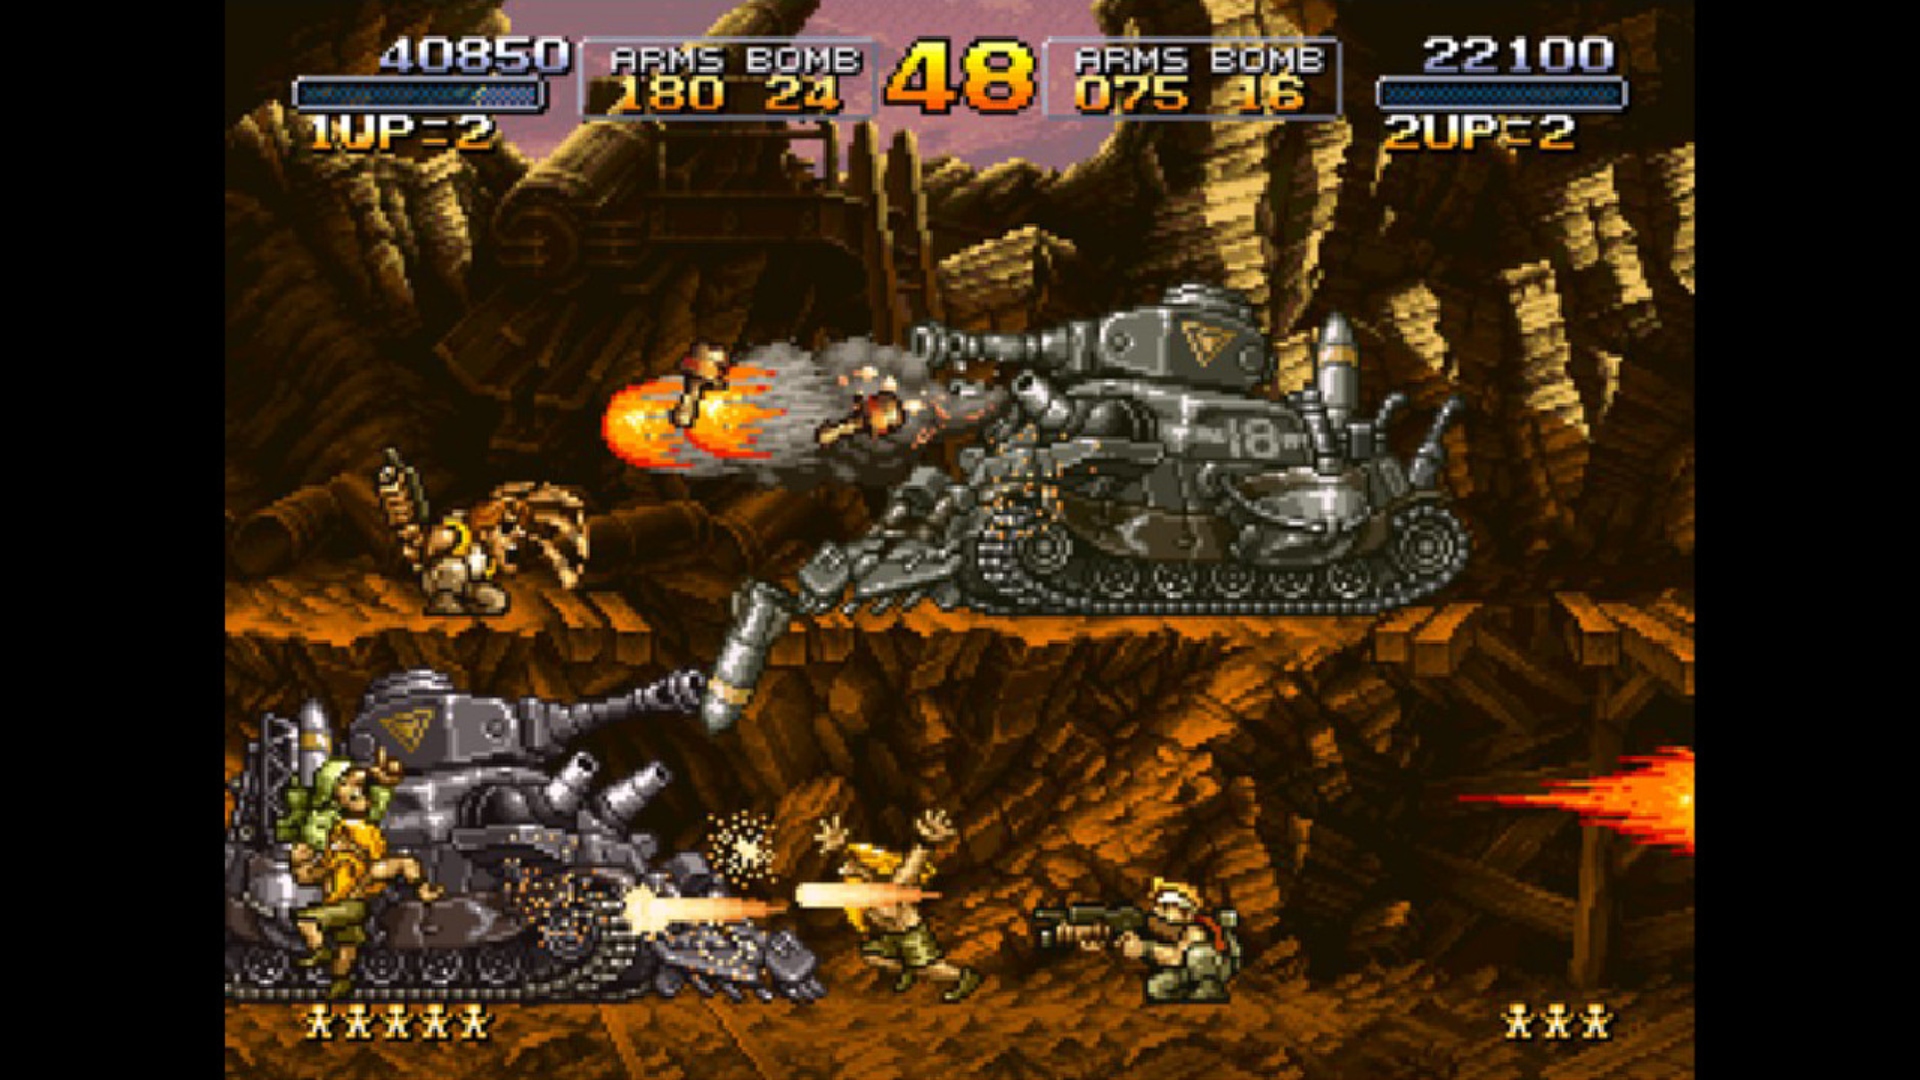 Best tank games: Metal Slug. Image shows two tanks with two players attacking them in a screenshot from the game.